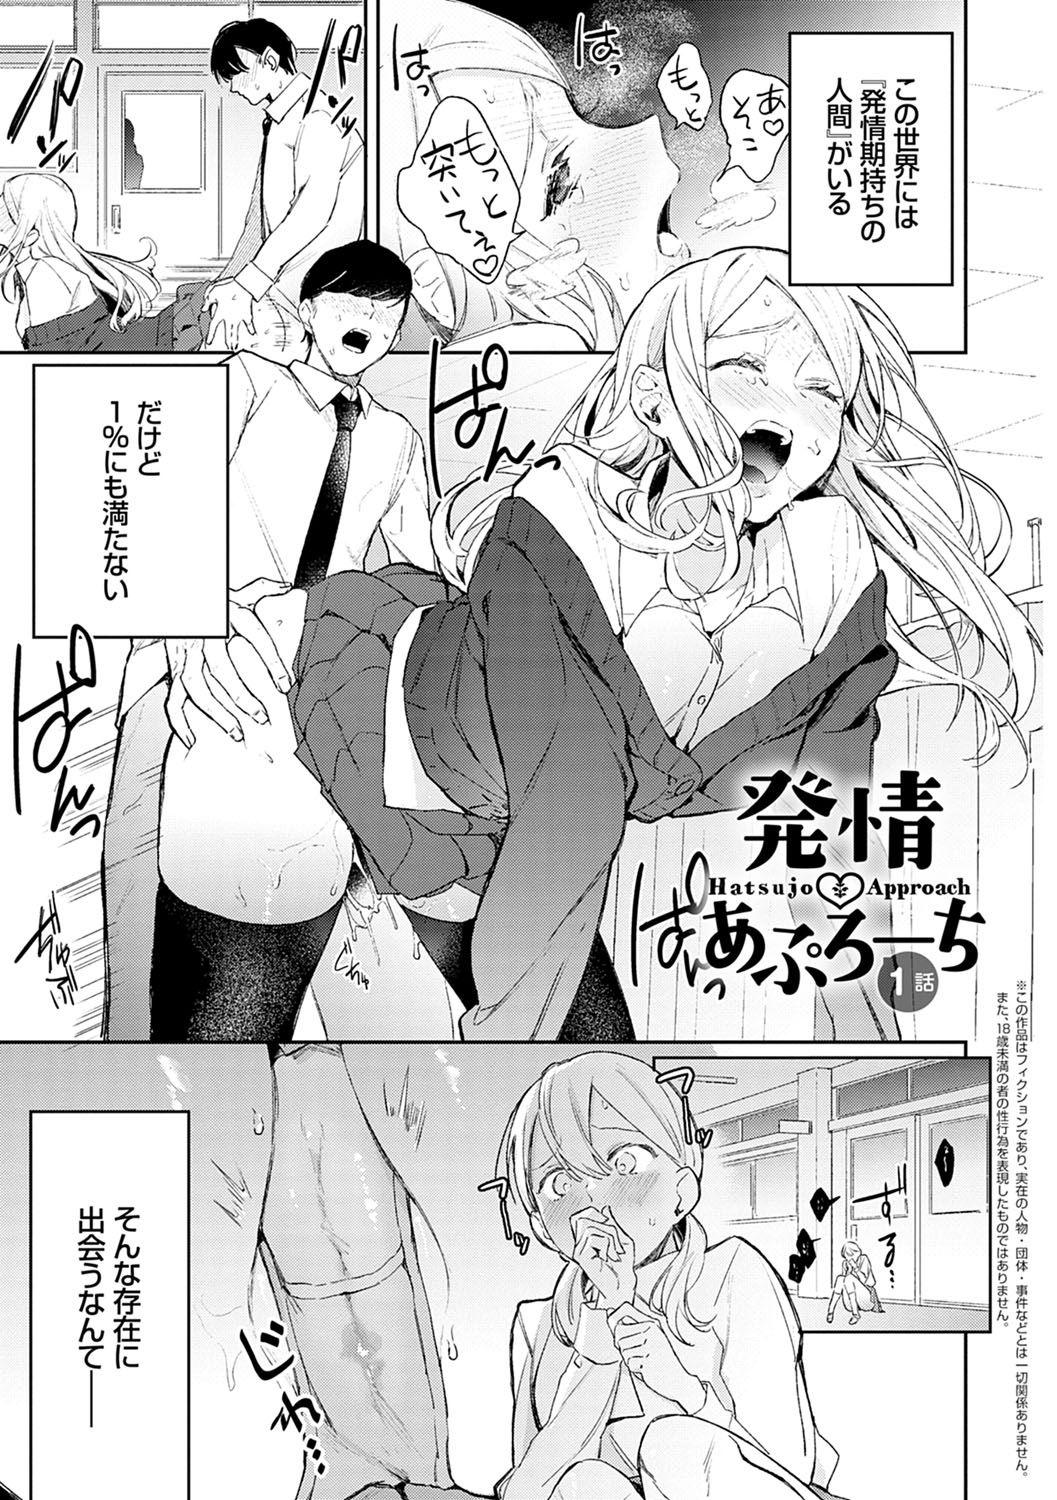 Twinks Yuwaku Mille-Feuille Lolicon - Page 4